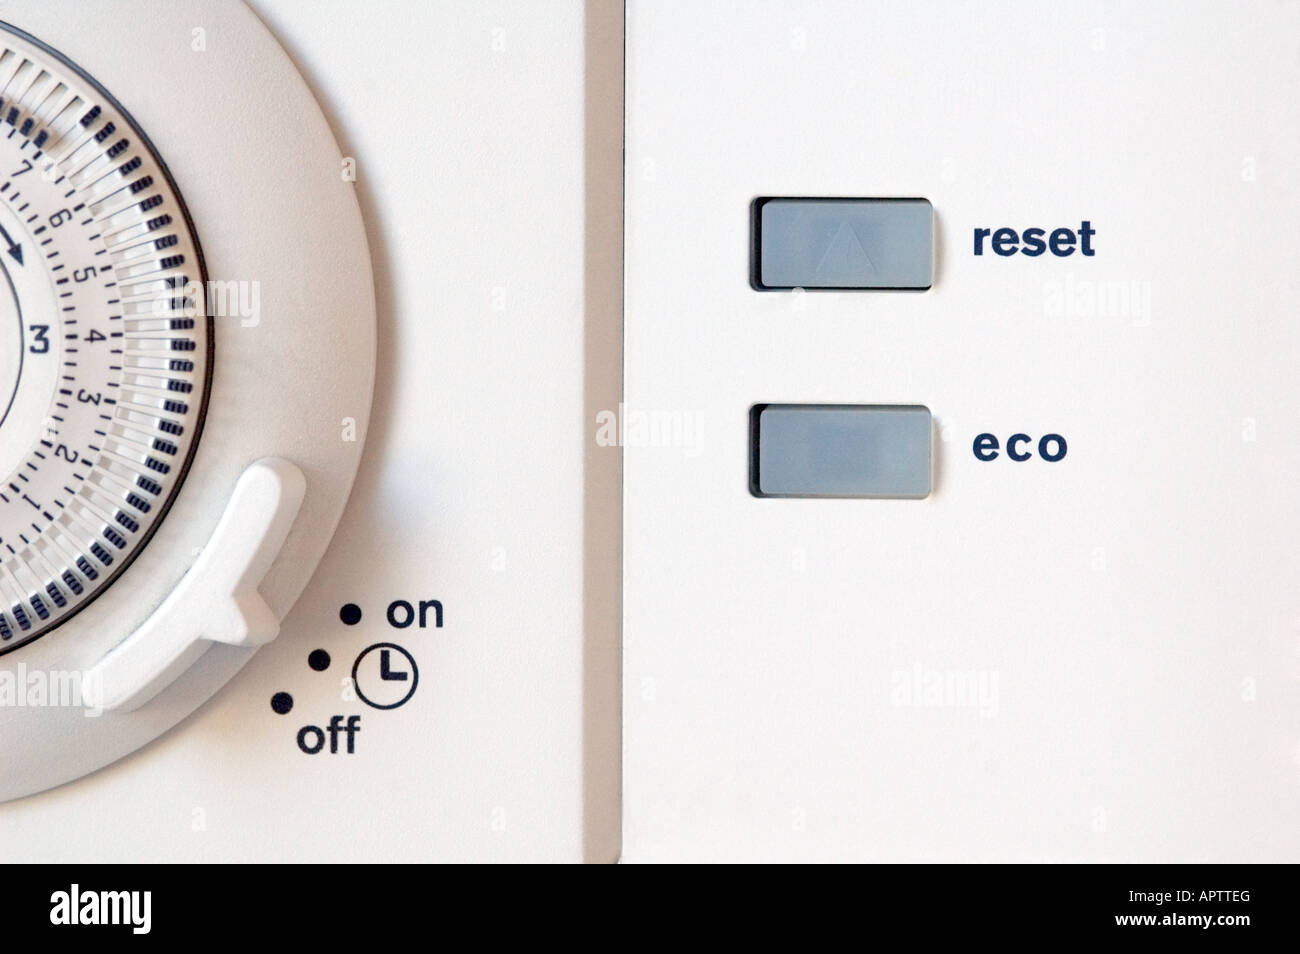 Eco setting on condensing boiler Stock Photo